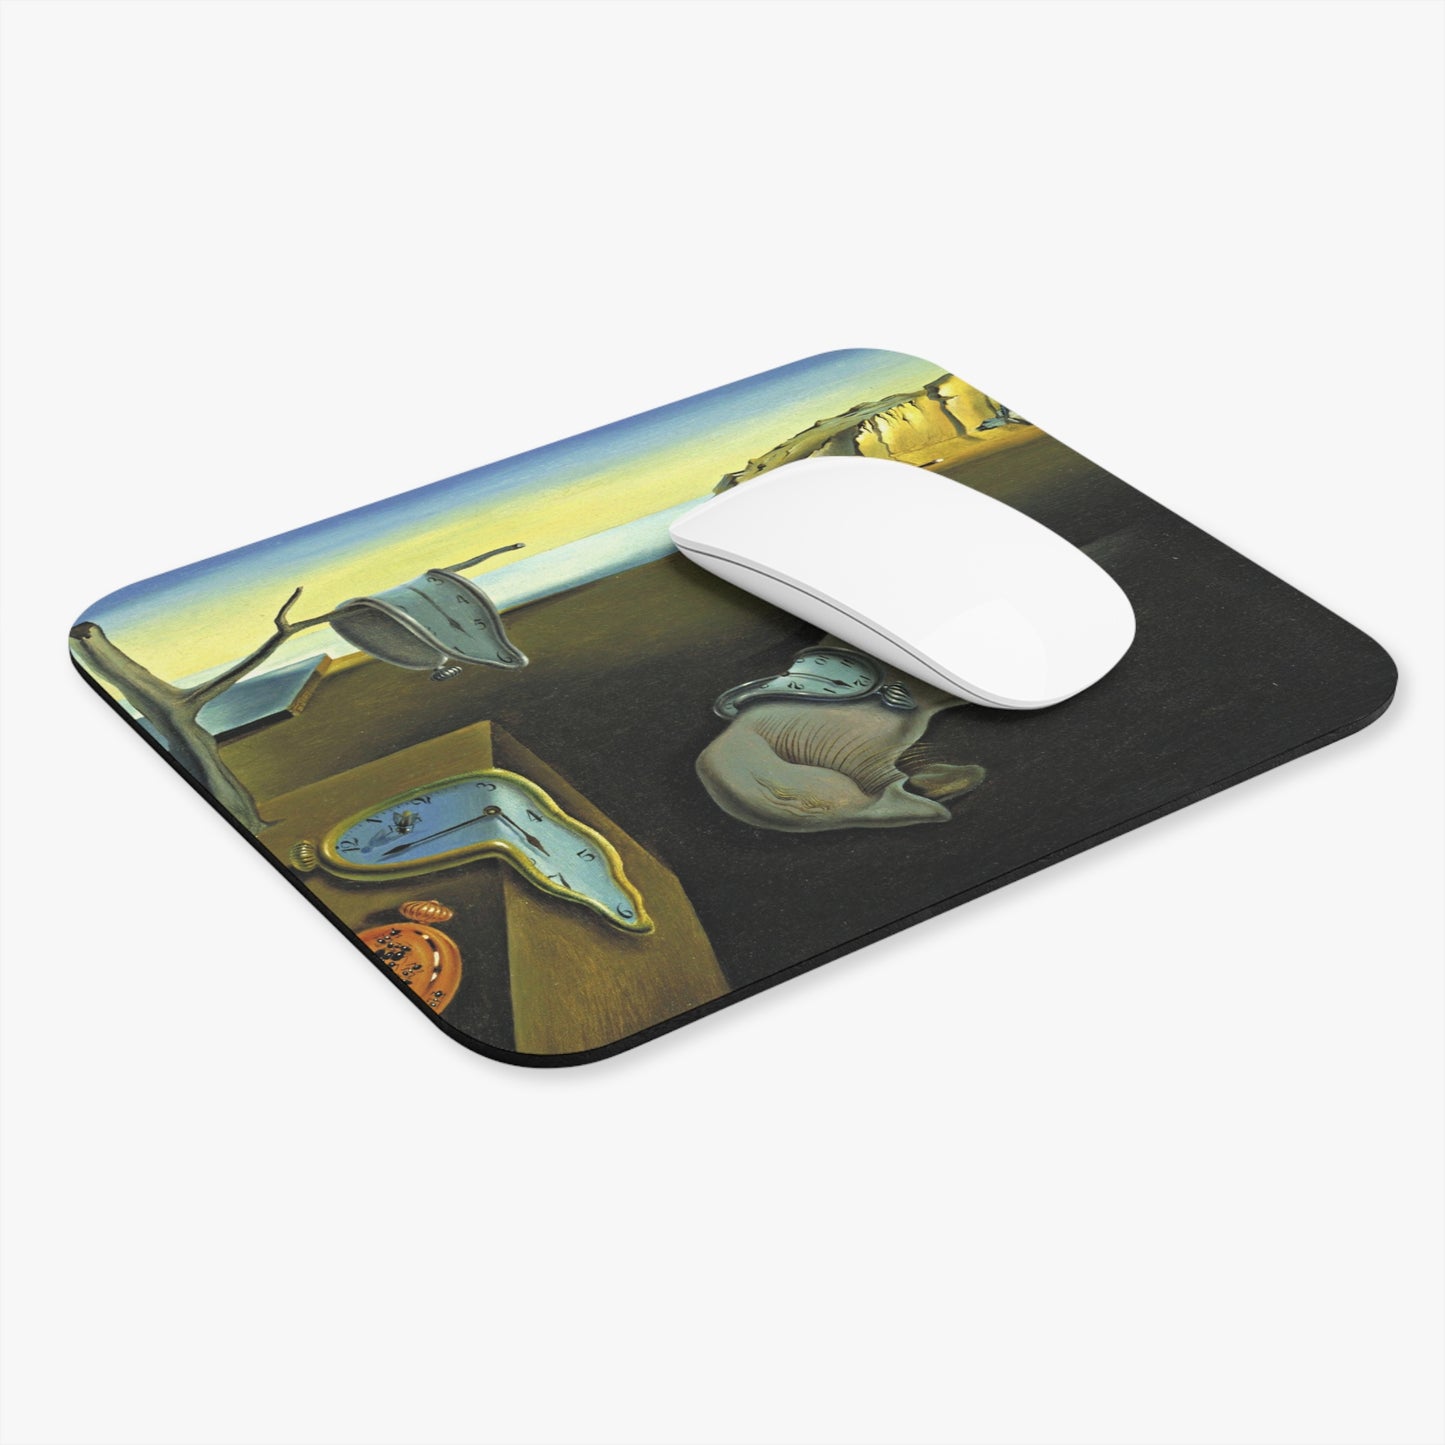 SALVADOR DALI - THE PERSISTENCE OF MEMORY - ART MOUSE PAD